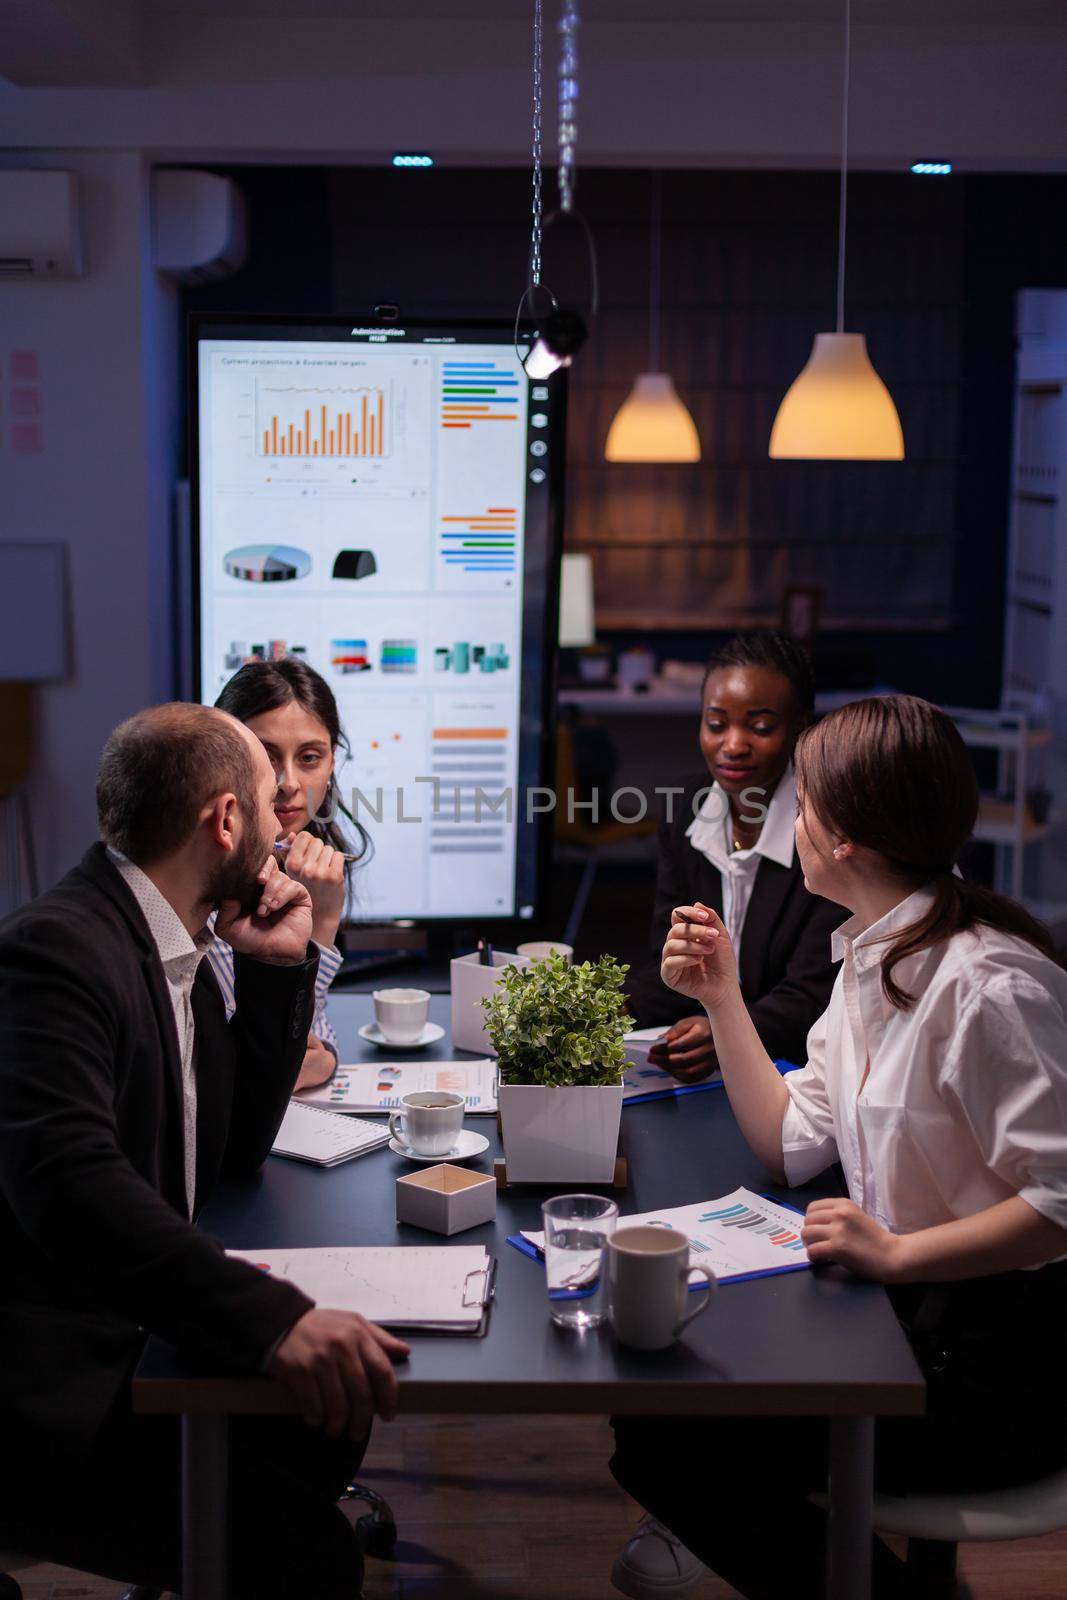 Workaholics businesspeople brainstorming financial company ideas by DCStudio